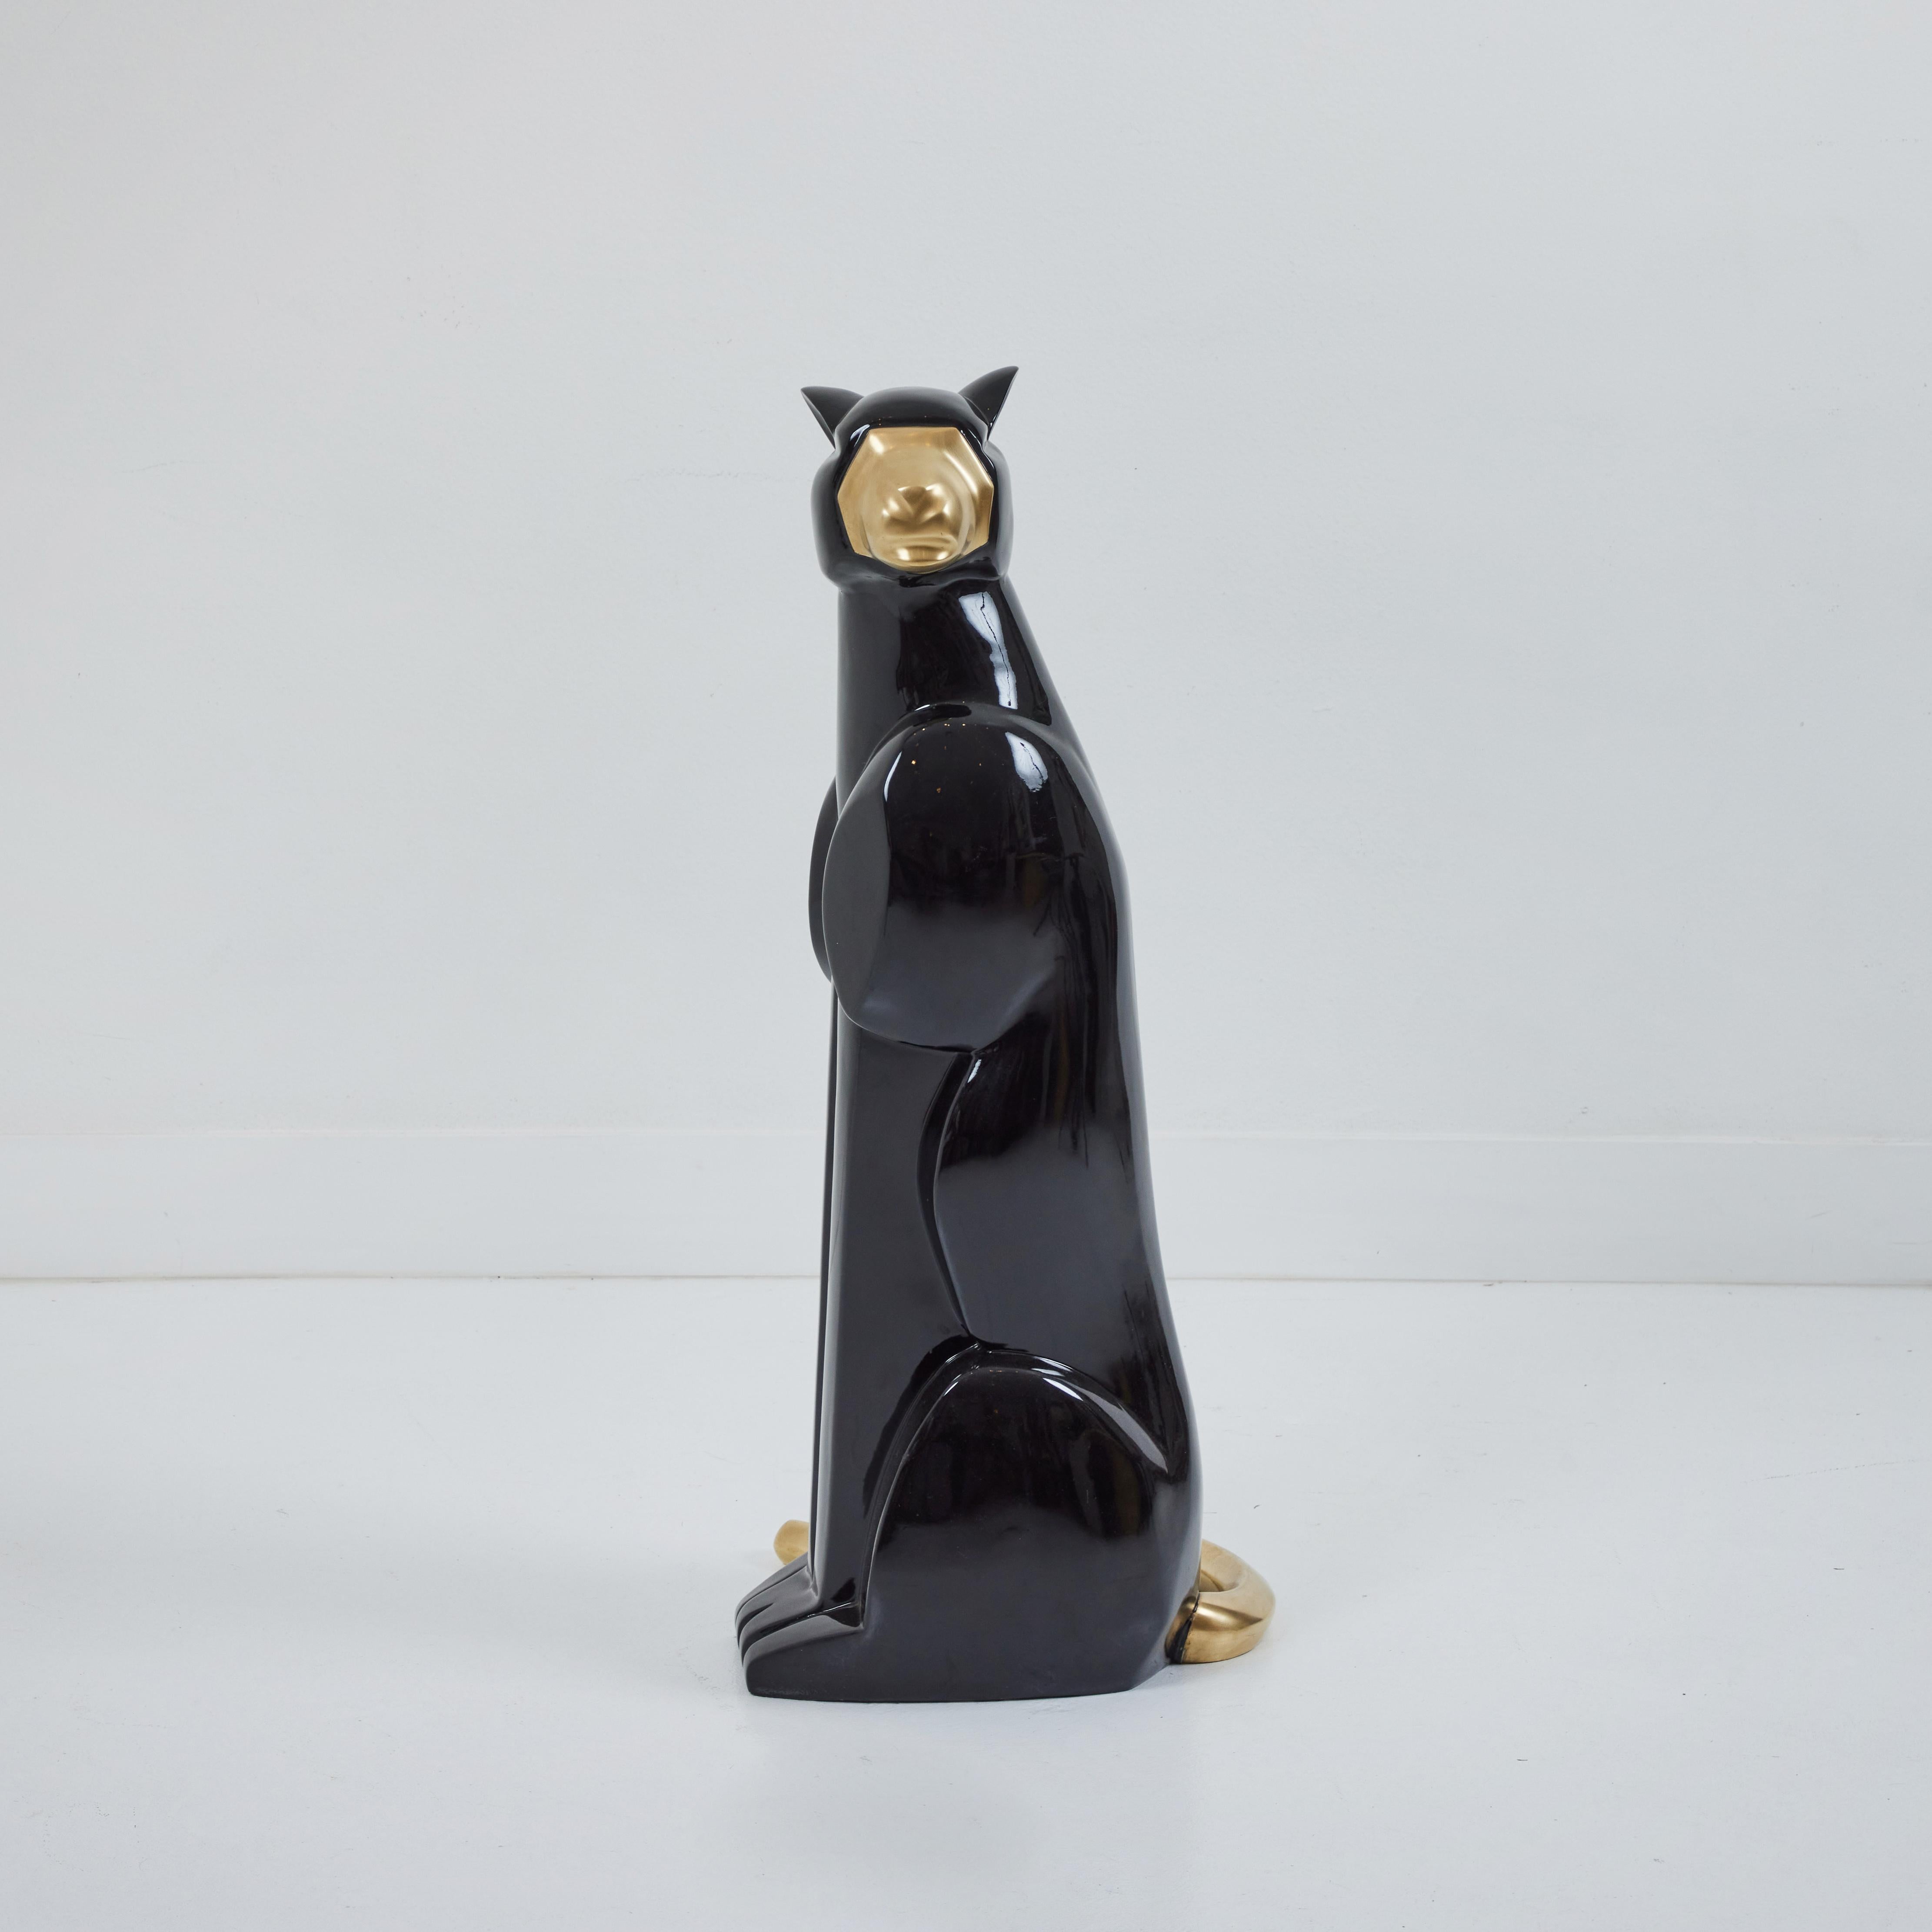 This is a sleek art deco styled black panther with brass details. The panther is in a seated position with its face turned to the left. Cast in fiberglass and lacquered black, this sculpture will definitely draw attention. The skill of the sculptor